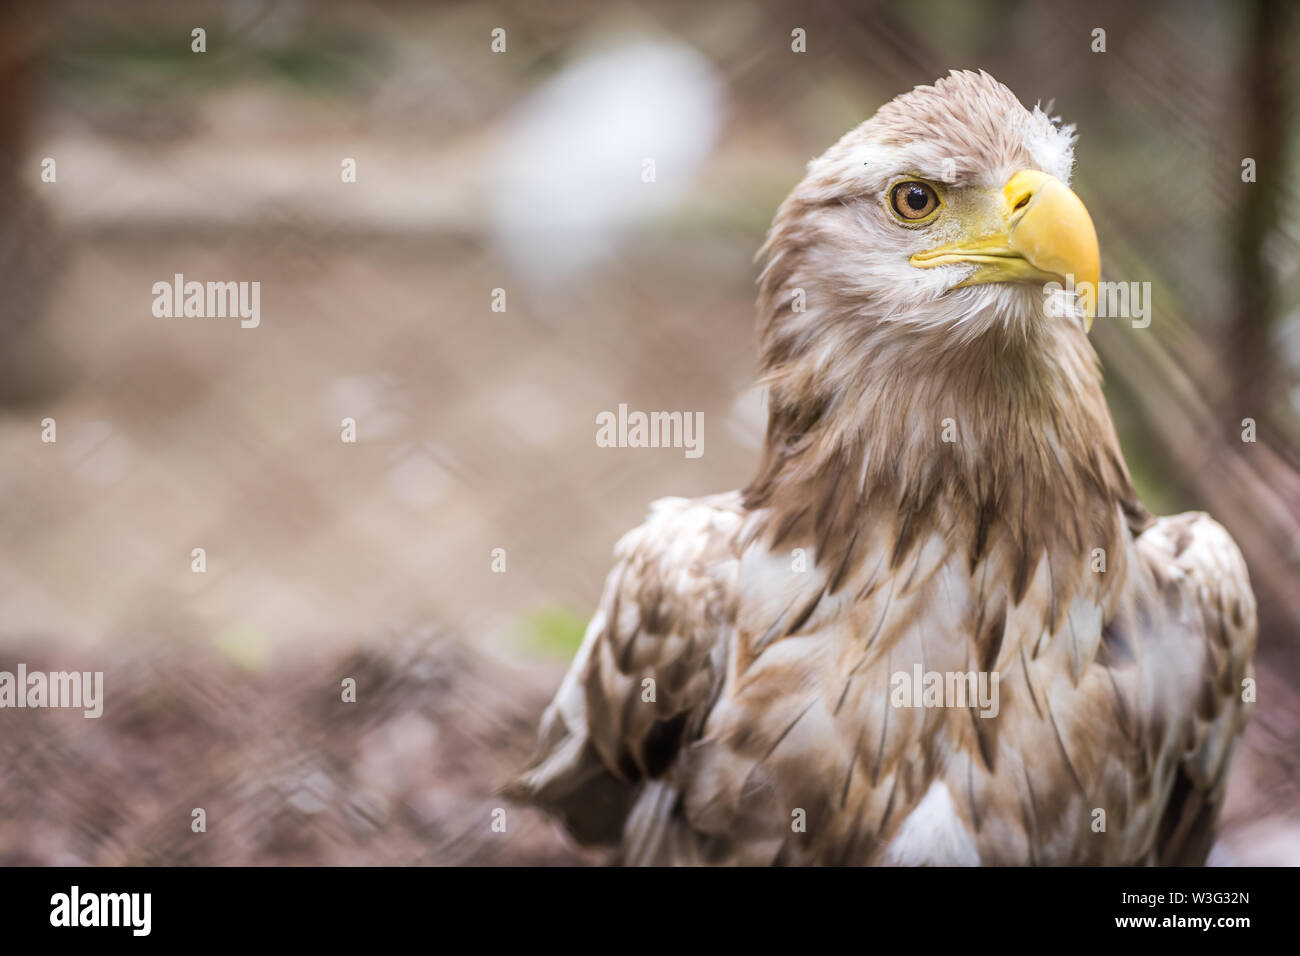 Mighty white tailed eagle called Haliaetus Albicilla in a cage in zoo, Poland Stock Photo